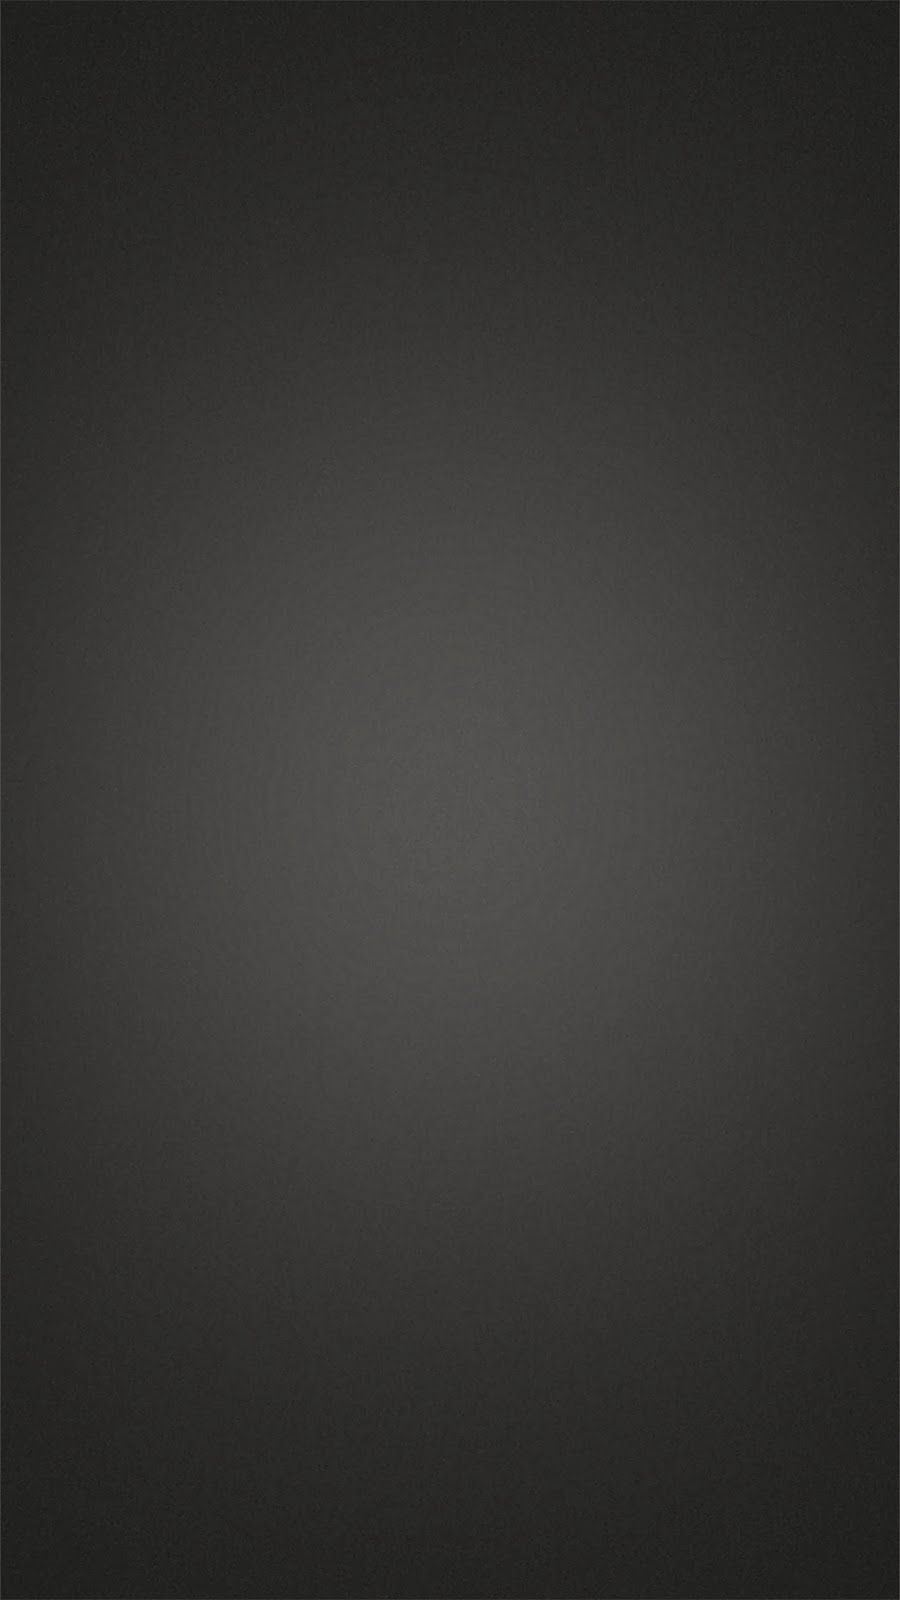 Dark Theme Android Wallpapers